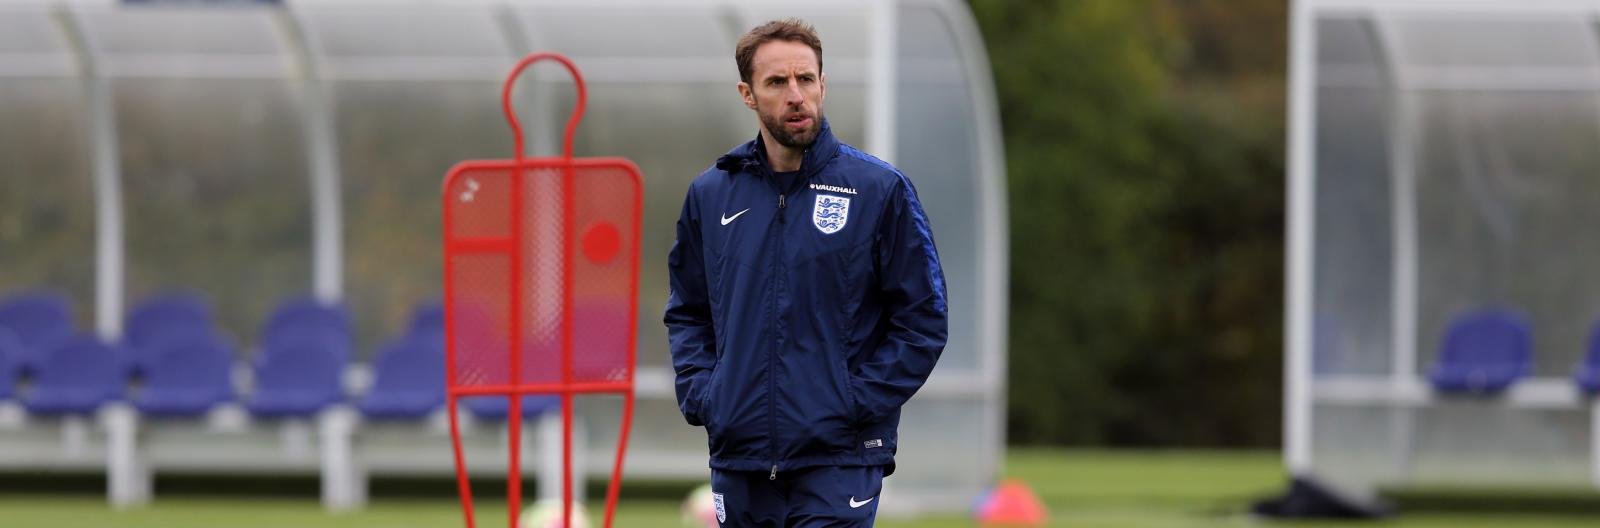 3 reasons why Gareth Southgate should become the new England manager